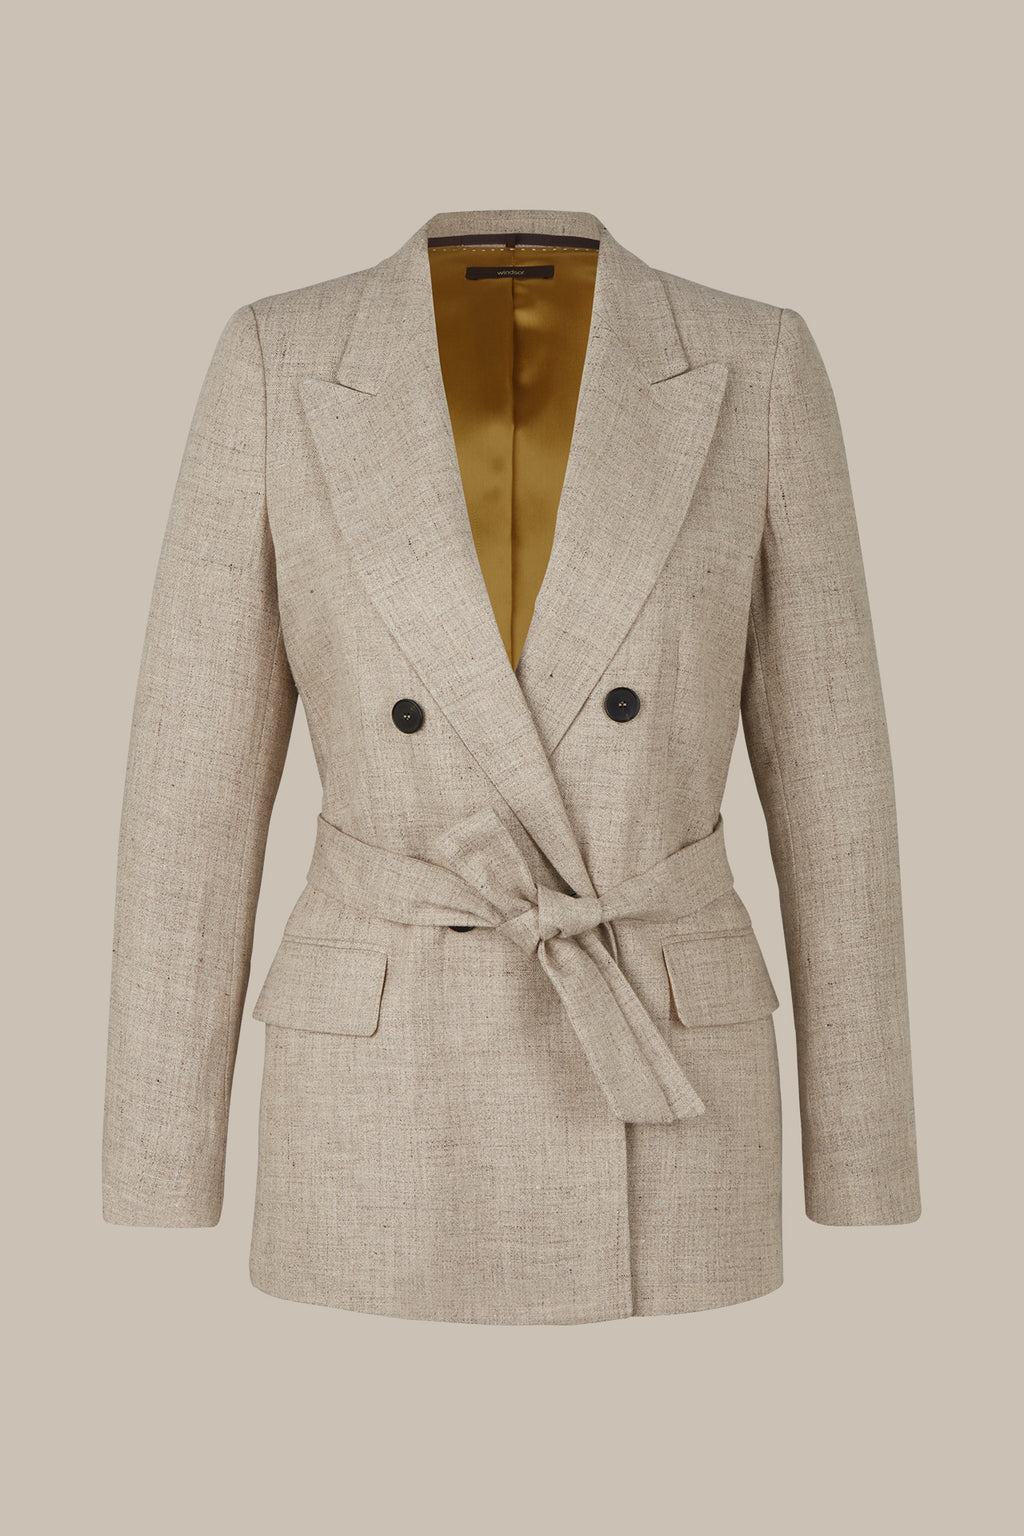 Double Breasted Blazer with Belt in Beige Patterned